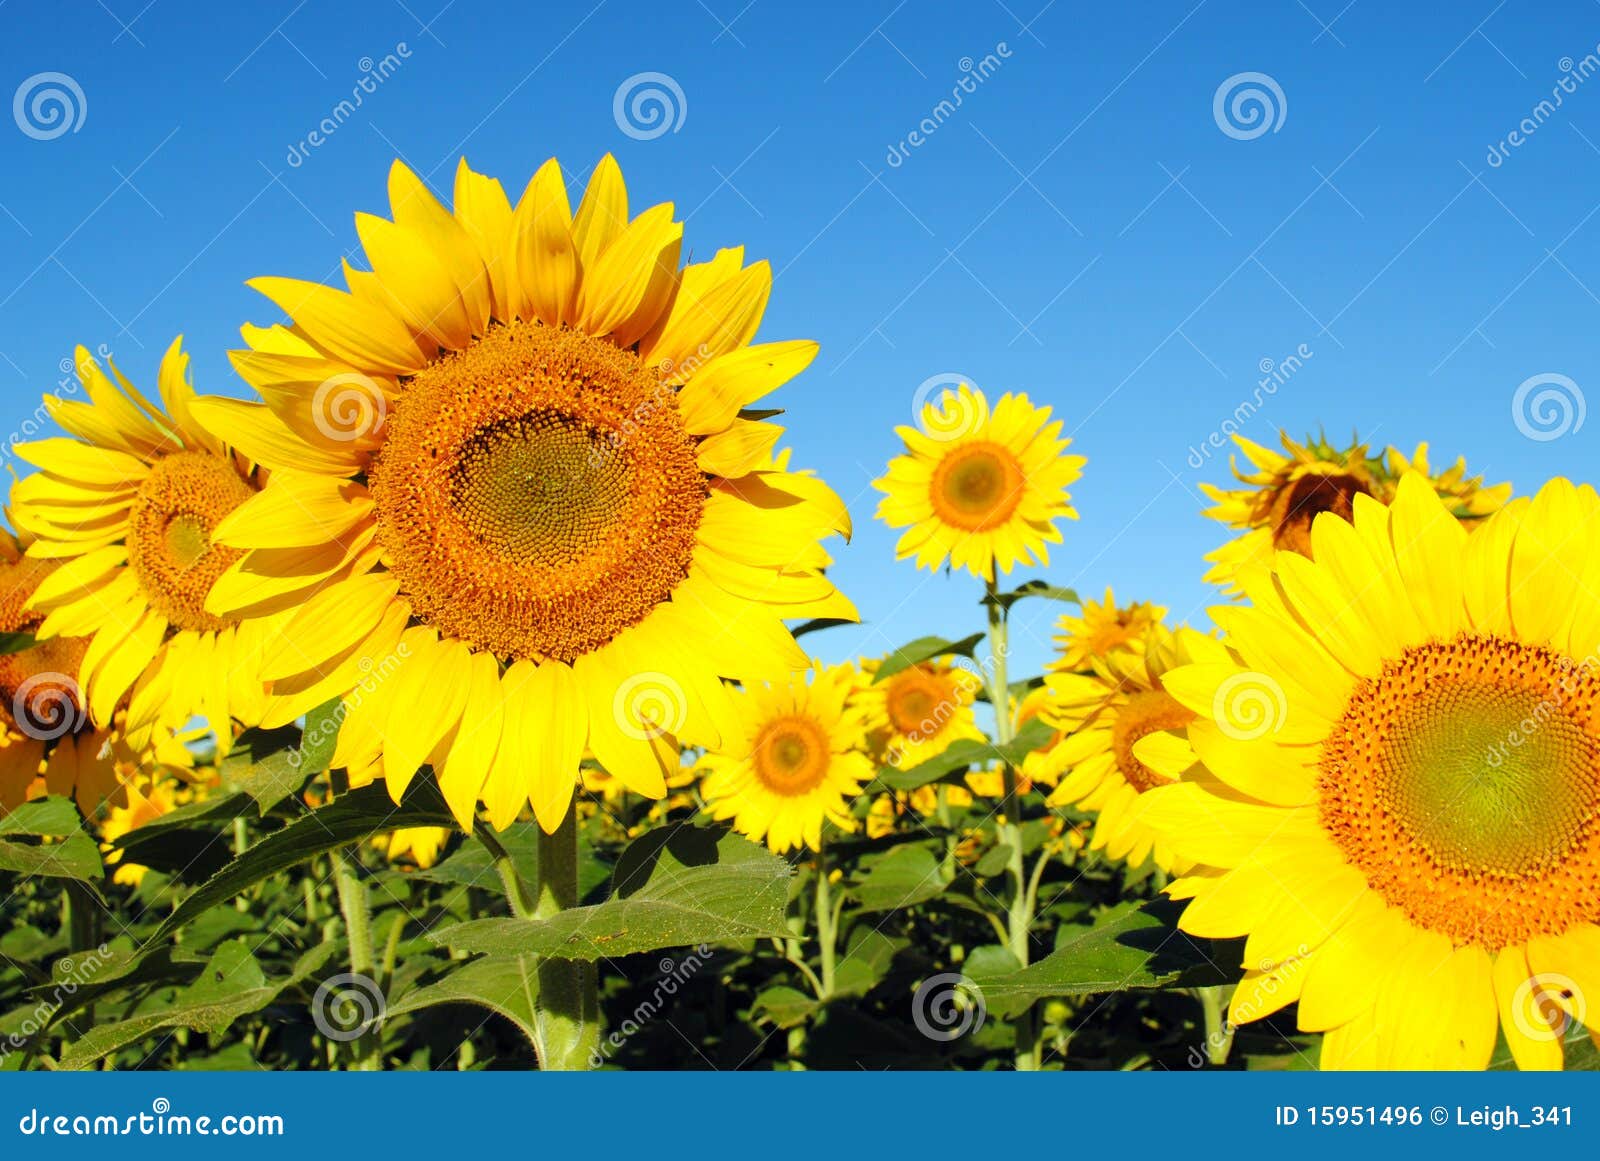 sunflowers on a sunny day